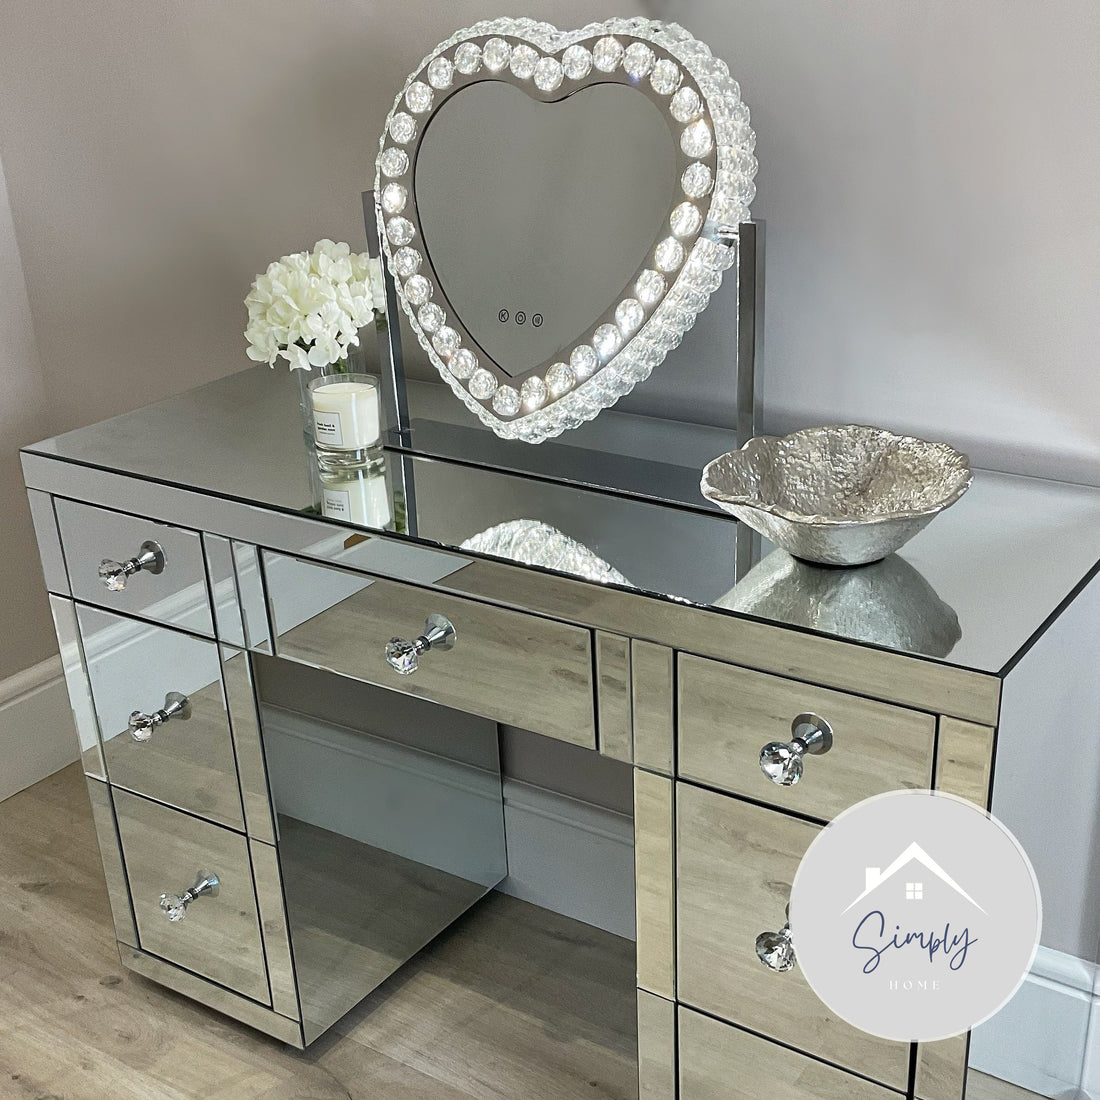 Fantasia Ultimate Heart Makeup Mirror: The Perfect Tabletop Mirror for Your Dressing Table!